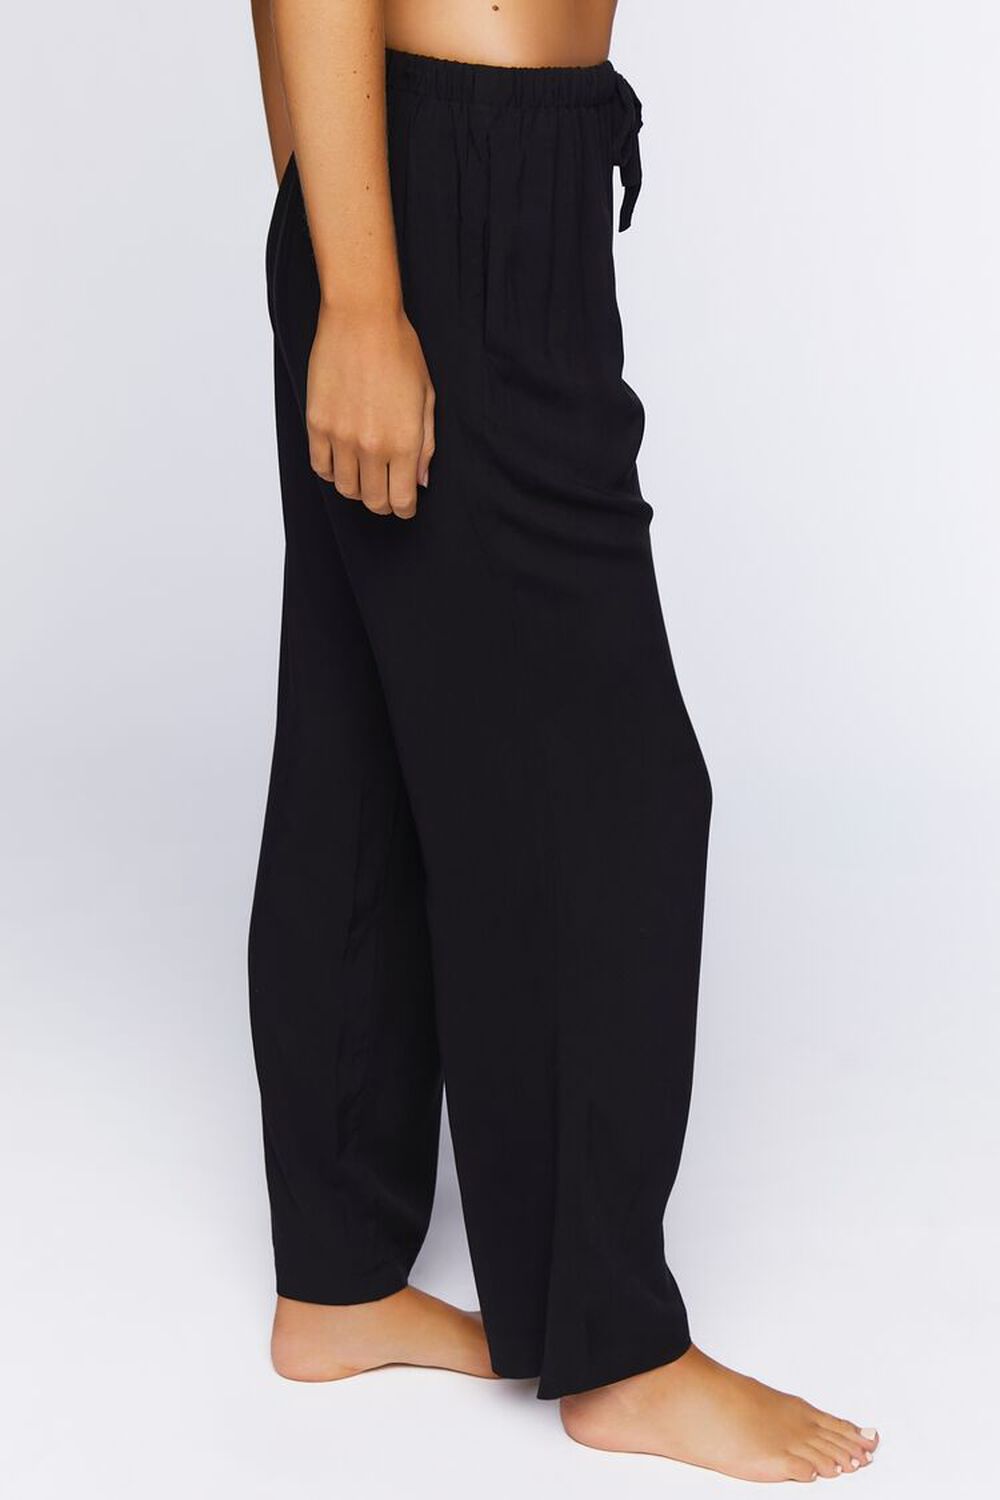 BLACK Relaxed-Fit Pajama Pants, image 3